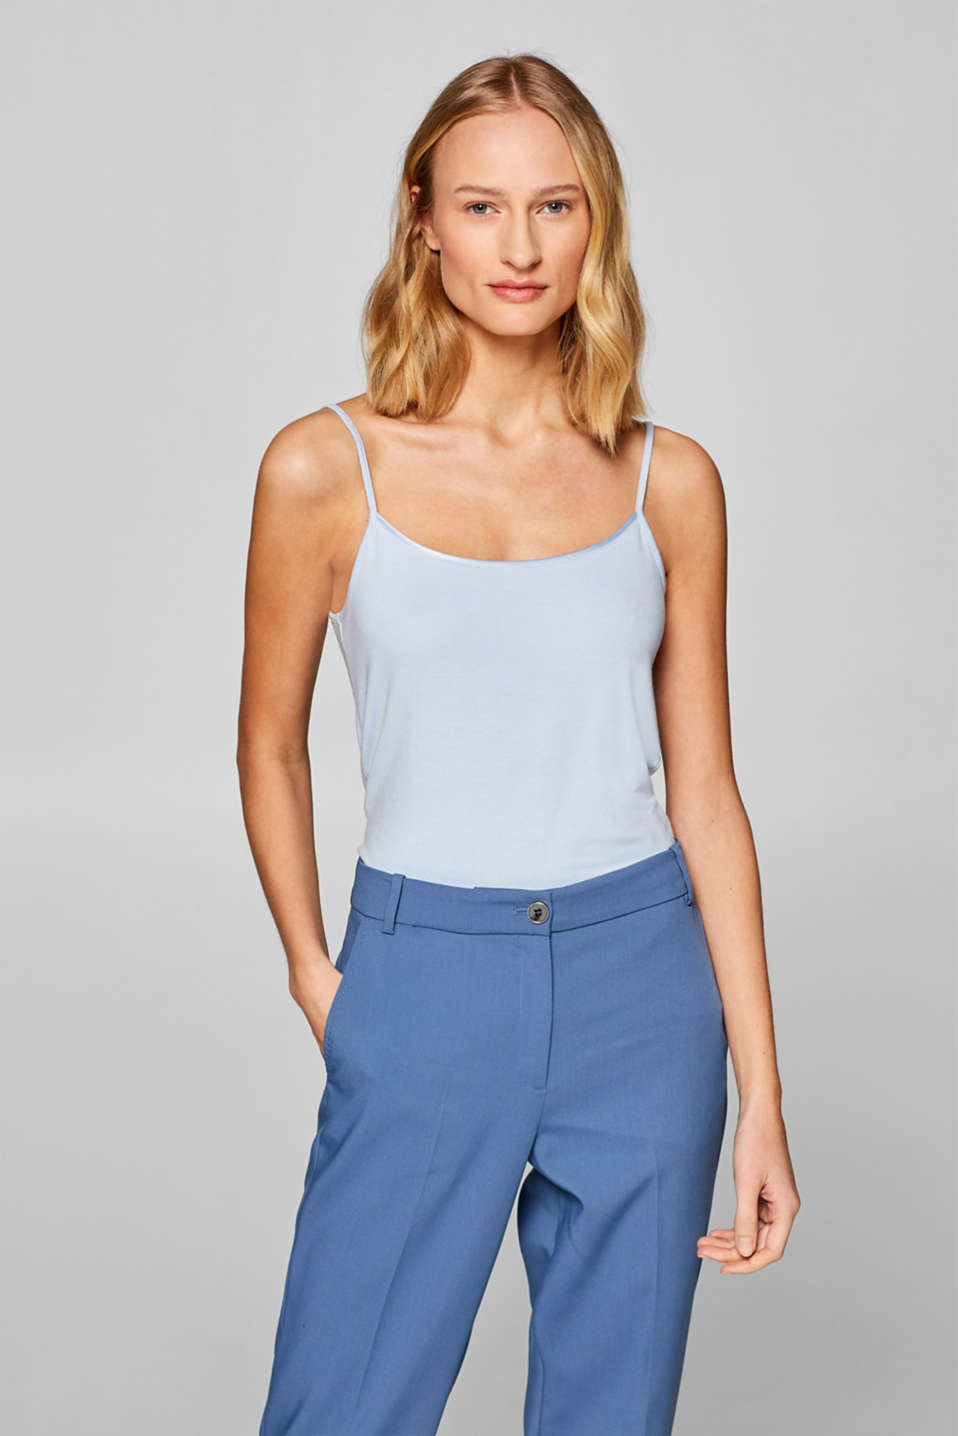 Esprit - Stretch top with spaghetti straps at our Online Shop